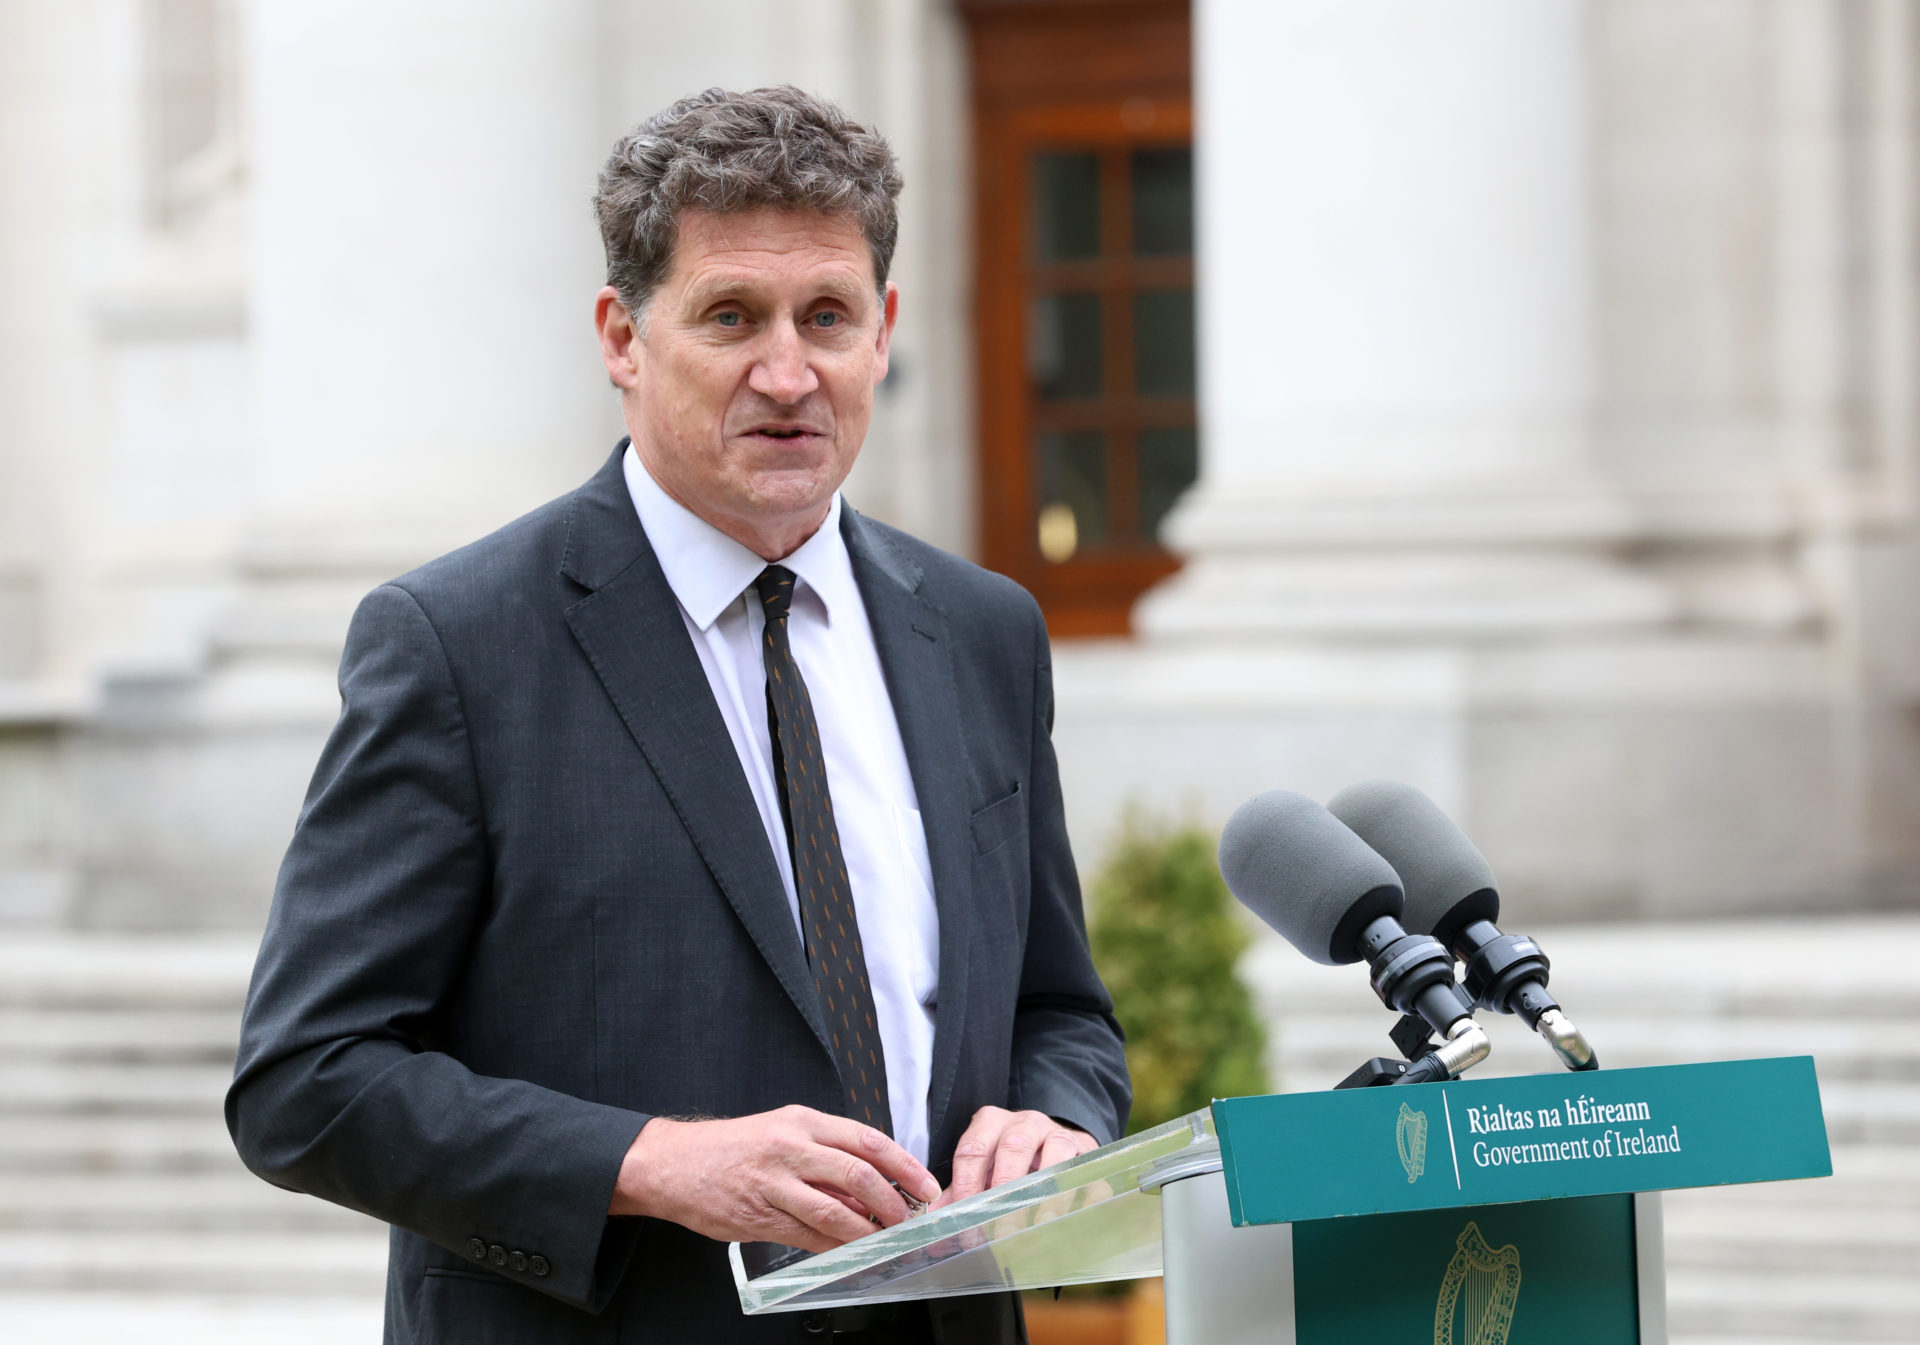 Eamon Ryan announces that he is stepping down as Green Party leader